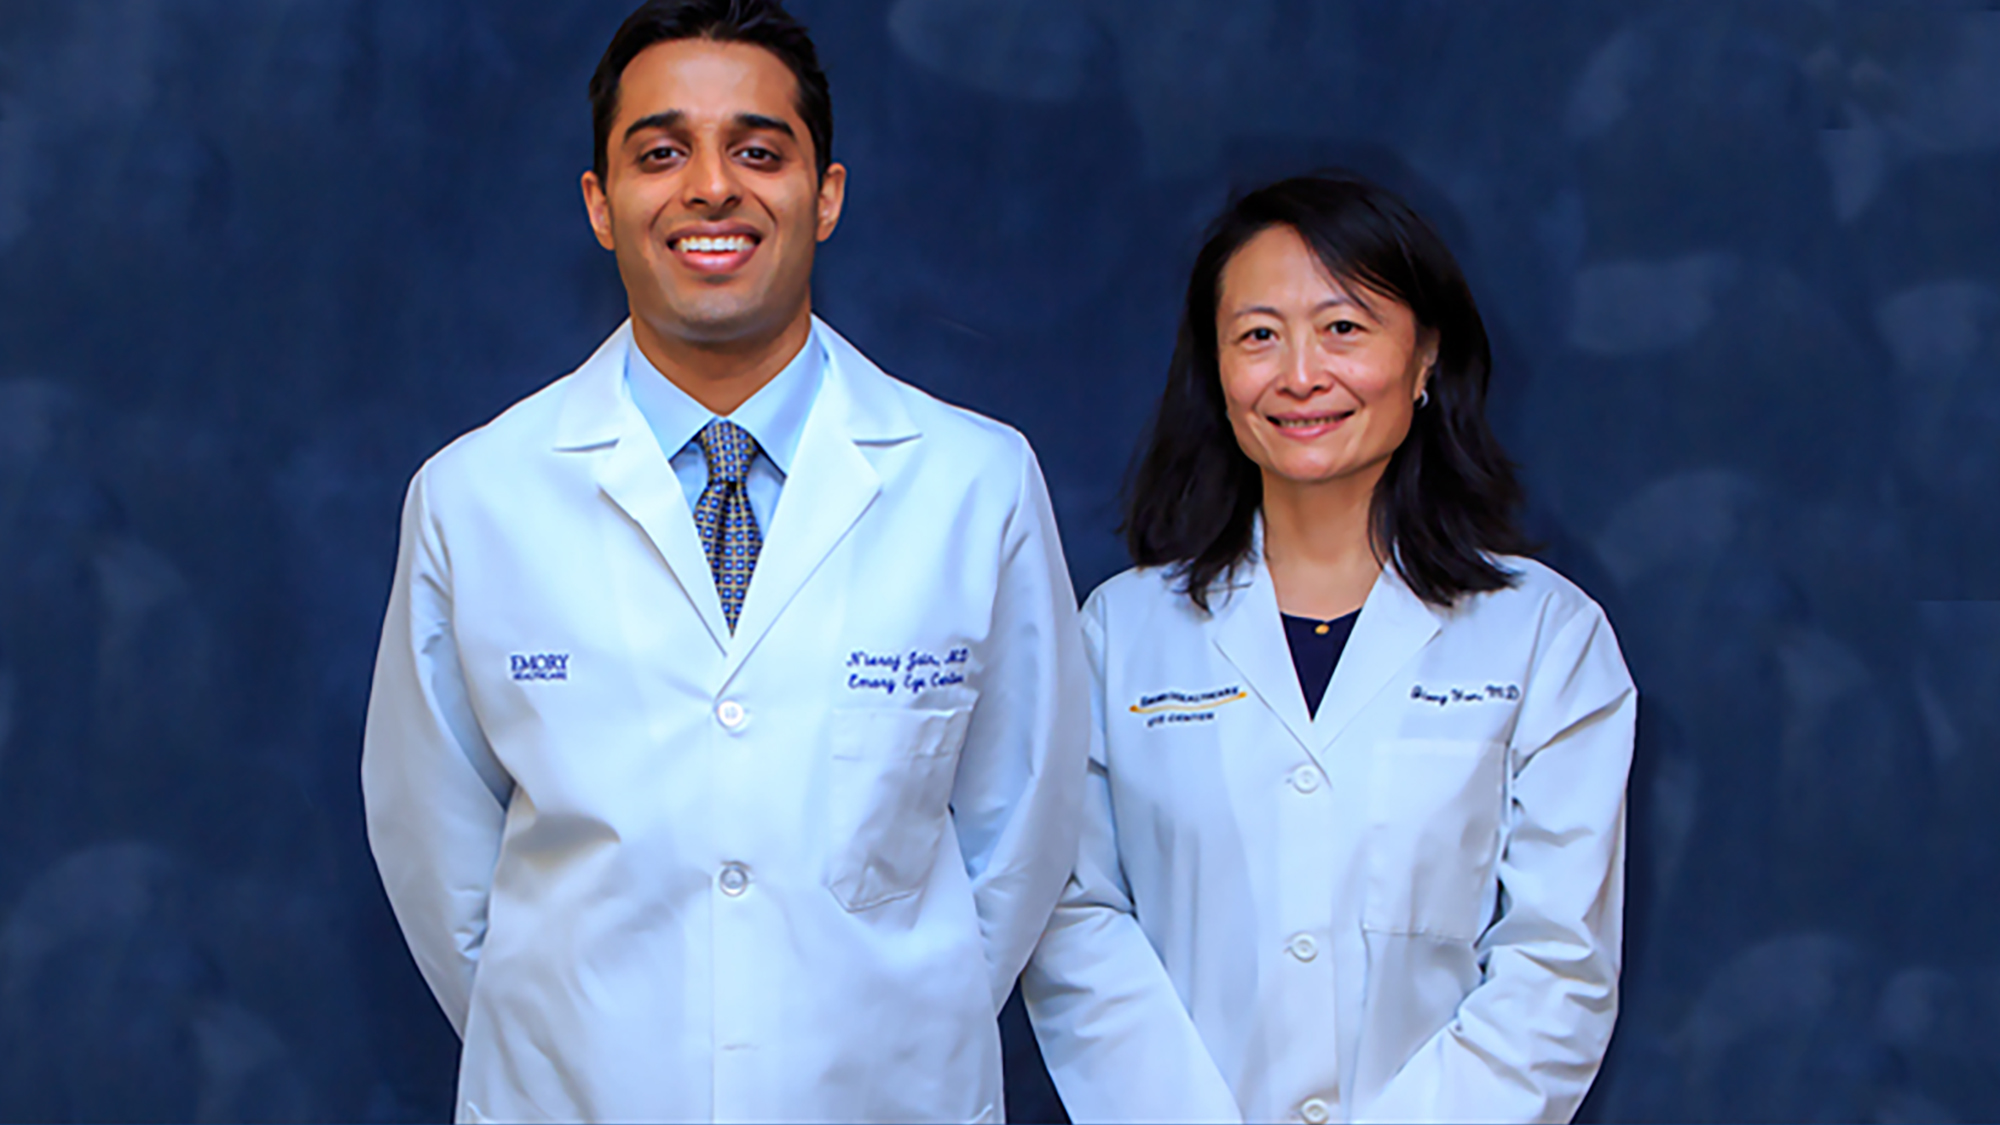 Dr. Jain and Dr. Yan, the ophthalmic genetics team